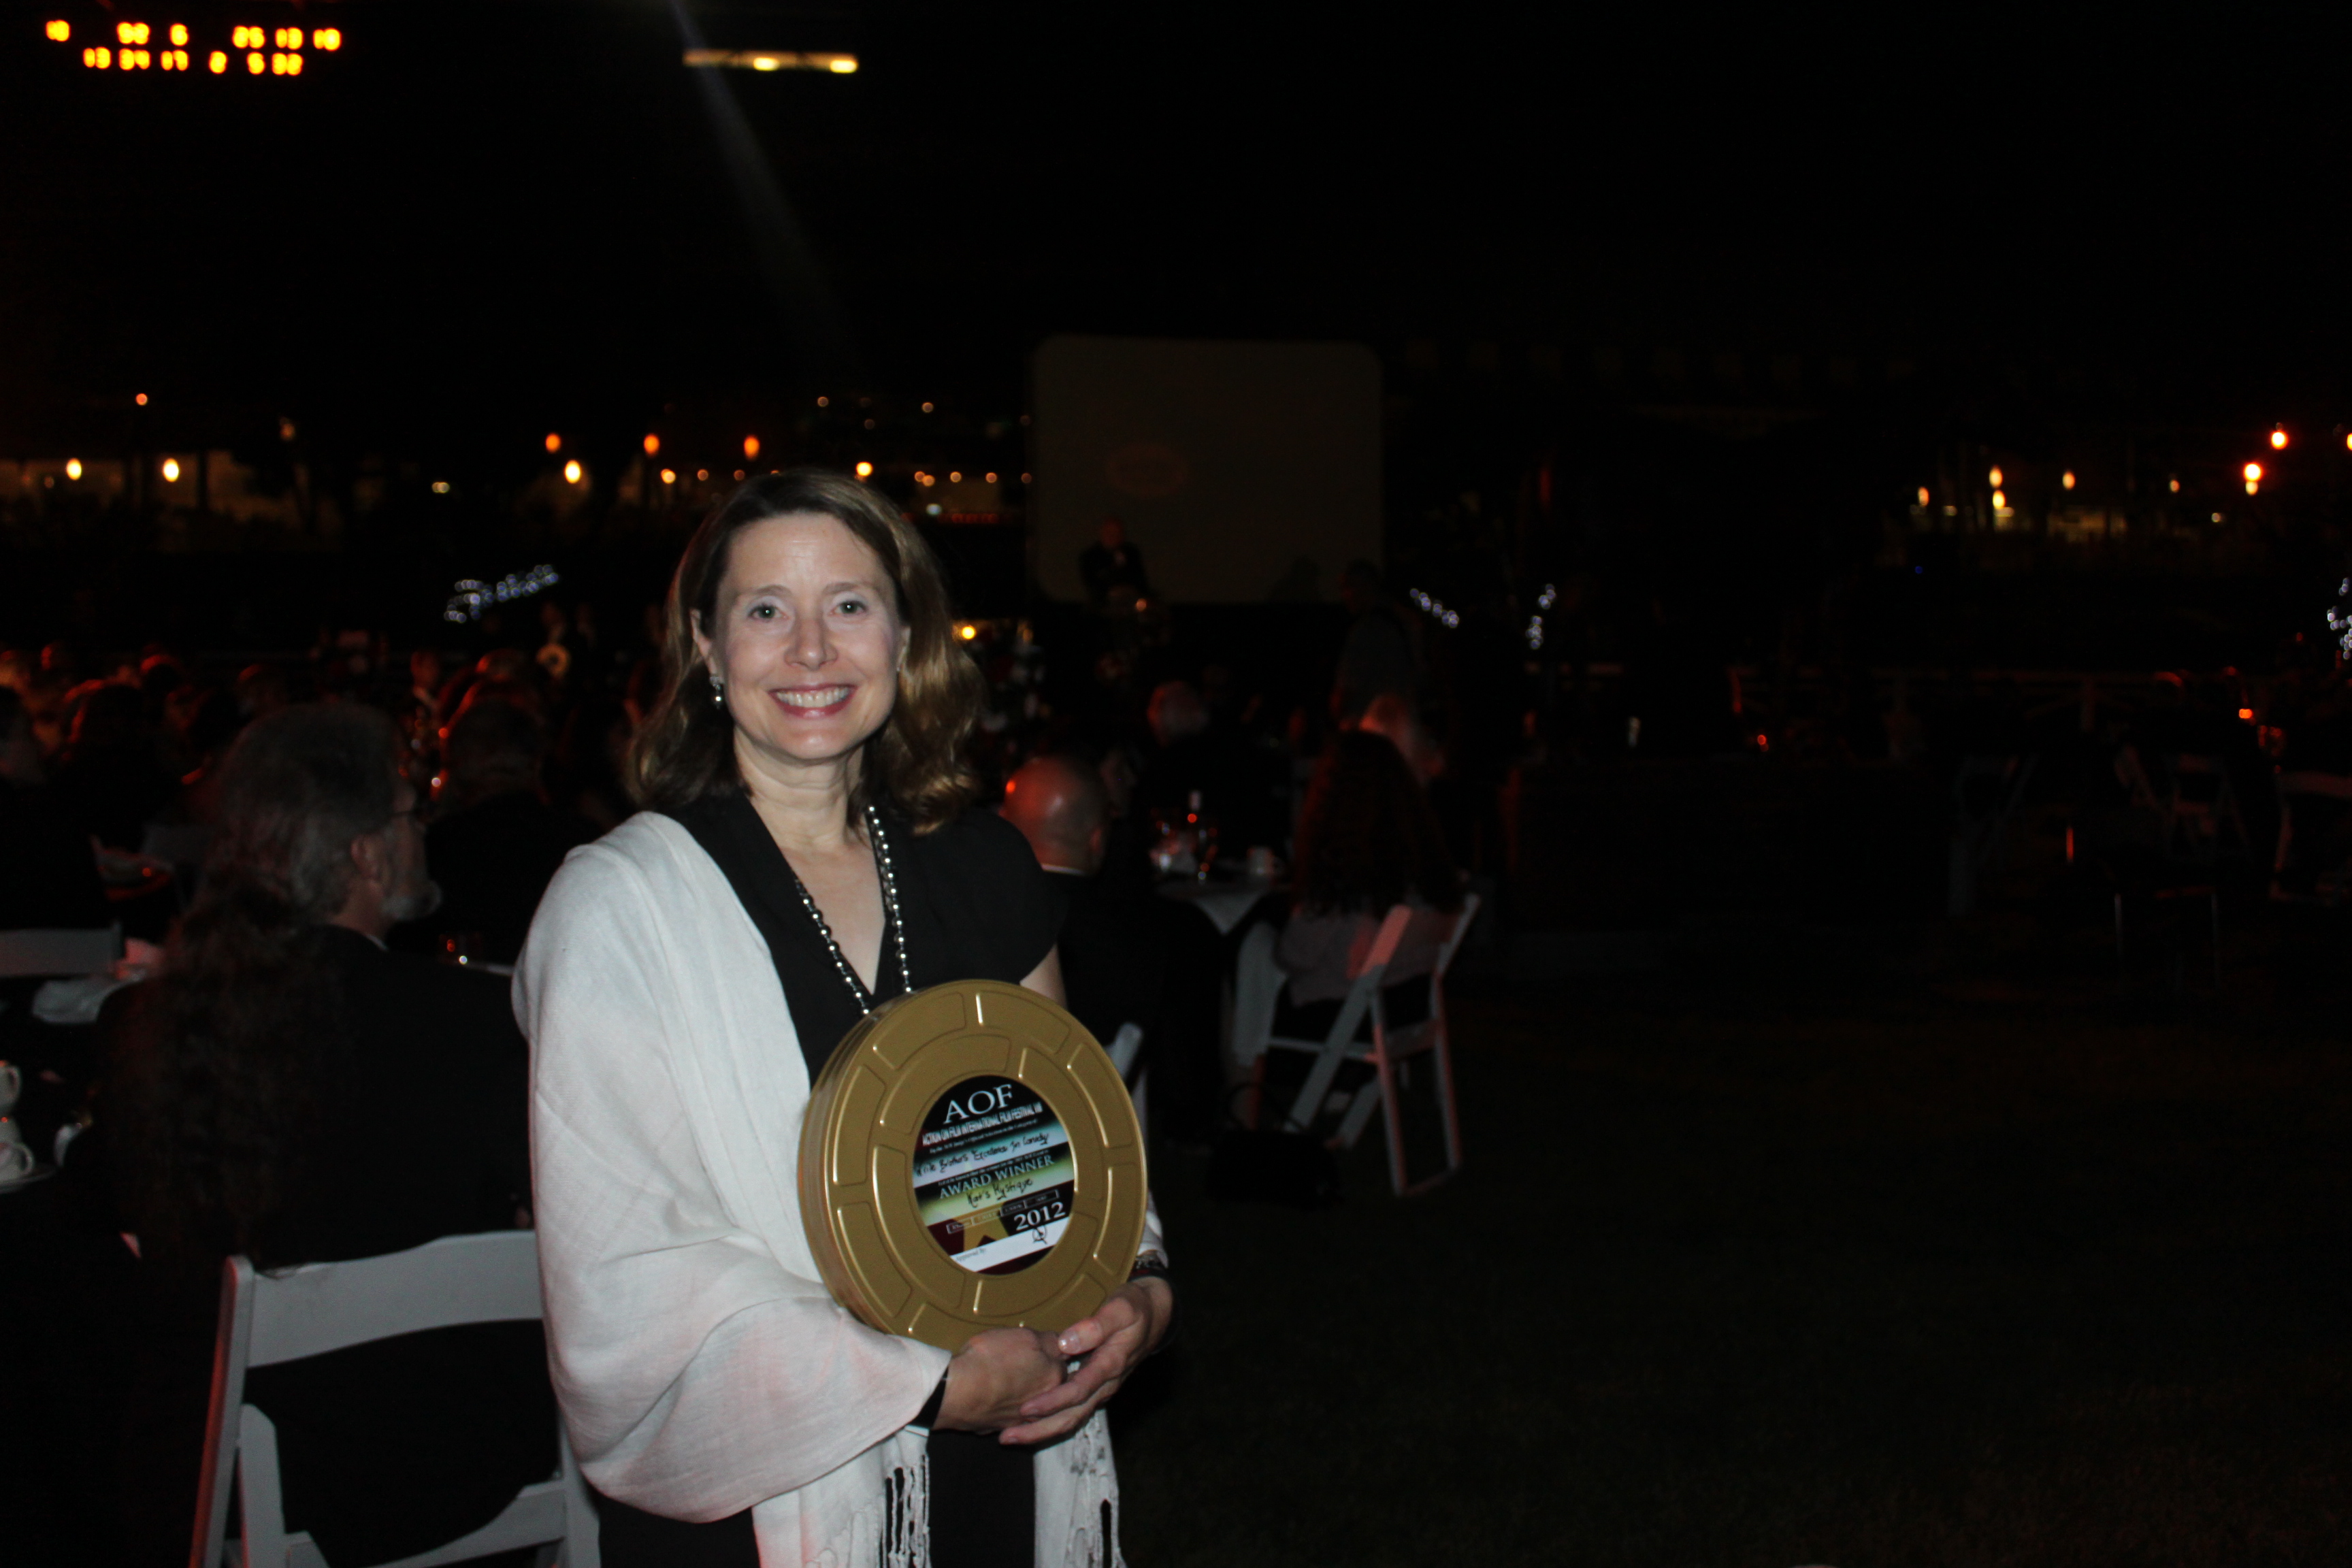 Colleen at the AOF Black Tie event at Santa Anita Racetrack. She won the 